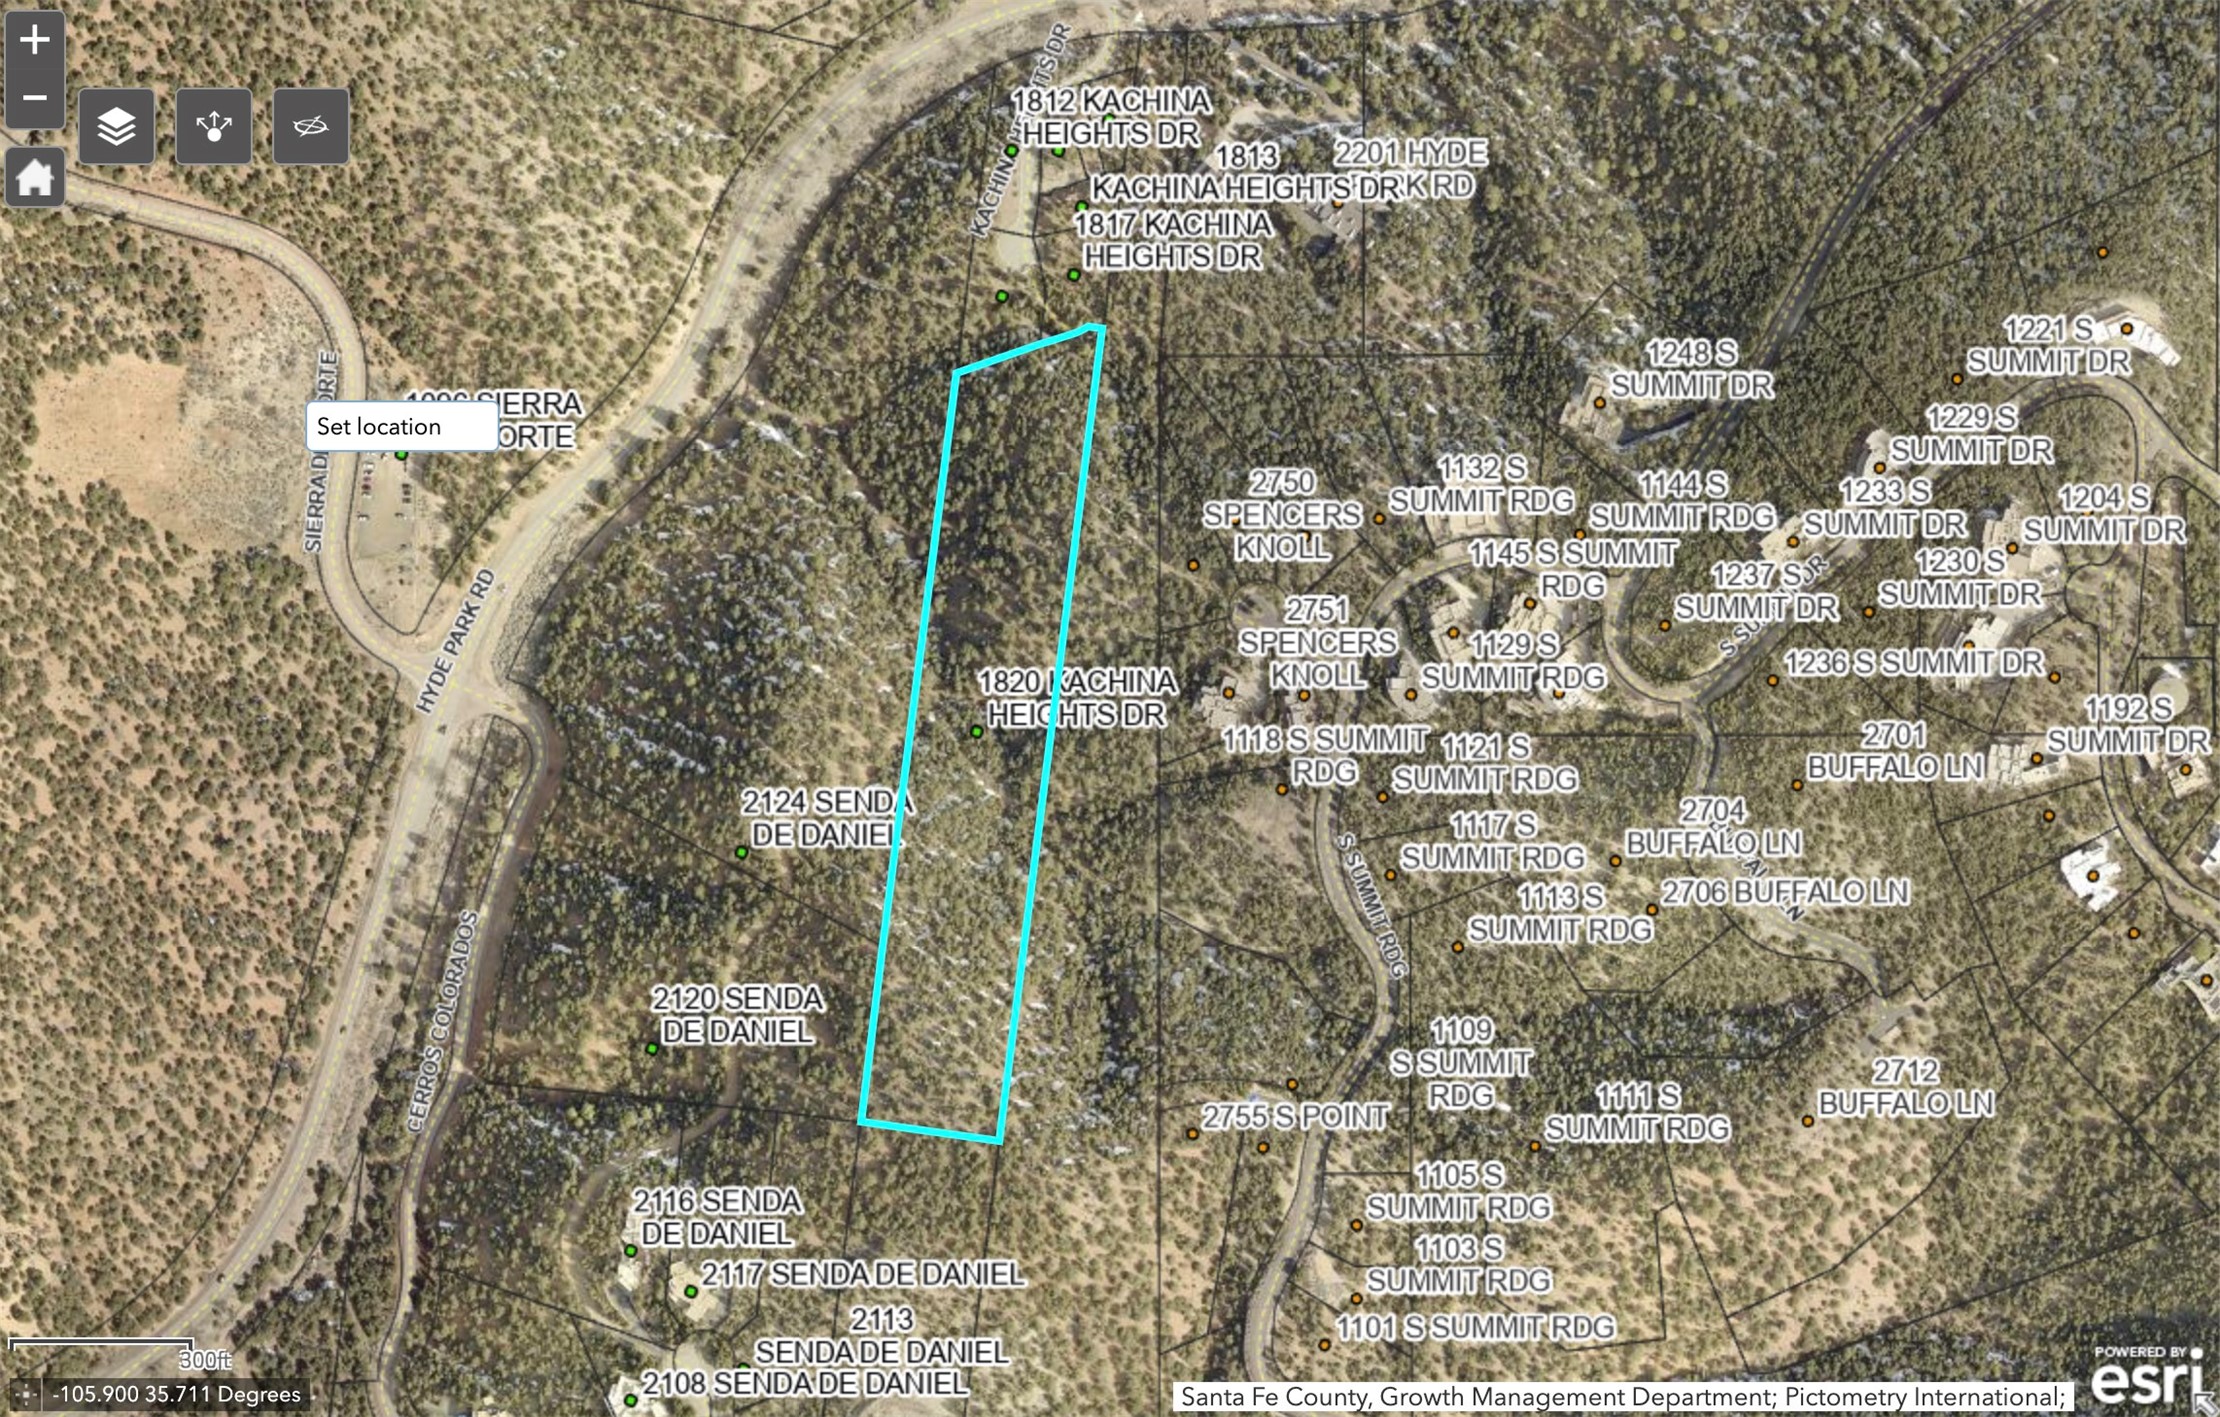 1820 Kachina Heights Lot 8, Santa Fe, New Mexico 87501, 3 Bedrooms Bedrooms, ,4 BathroomsBathrooms,Residential,For Sale,1820 Kachina Heights Lot 8,202340853